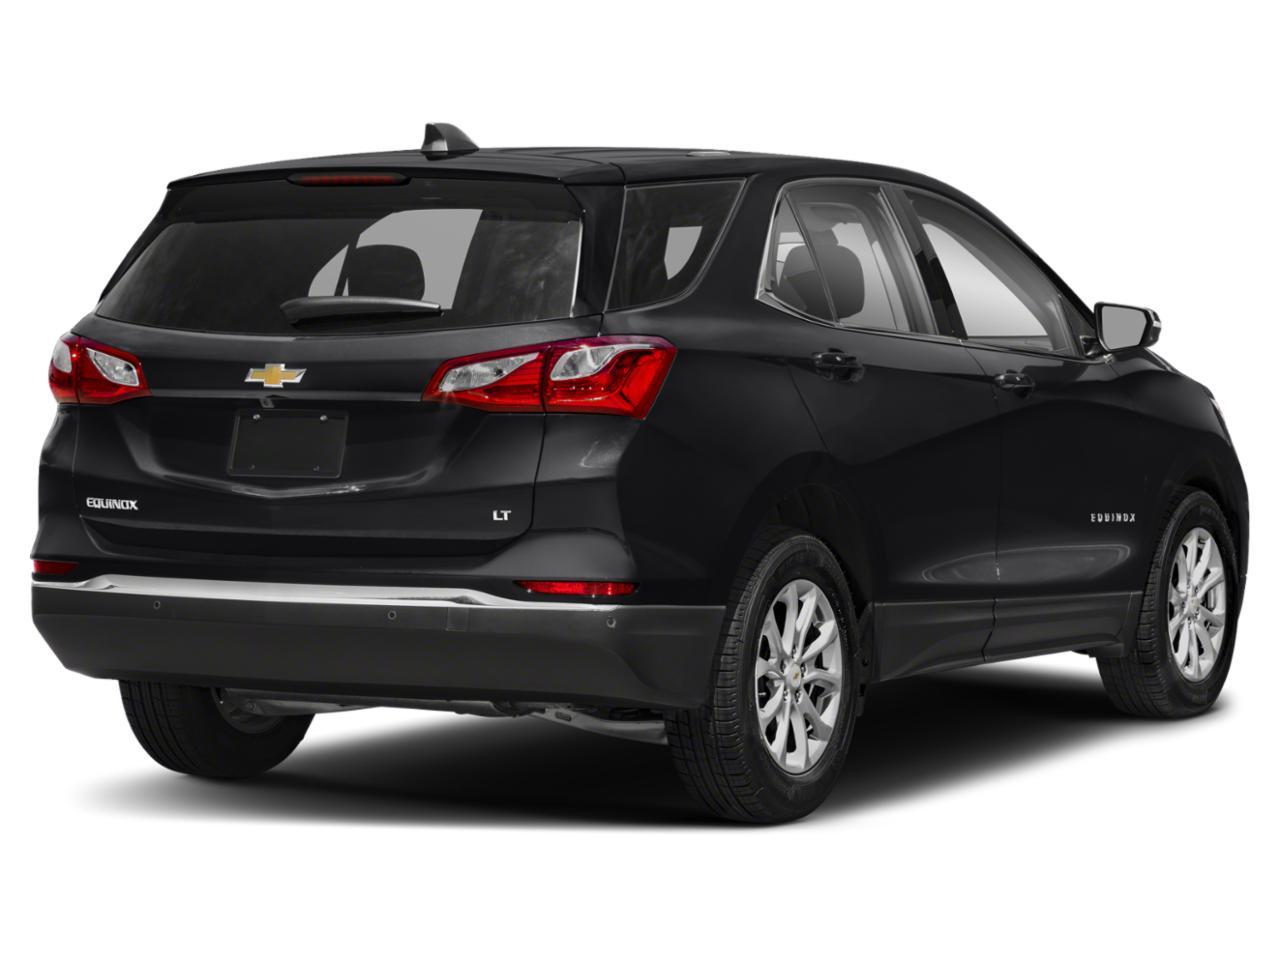 2018 Chevrolet Equinox Vehicle Photo in Greeley, CO 80634-8763